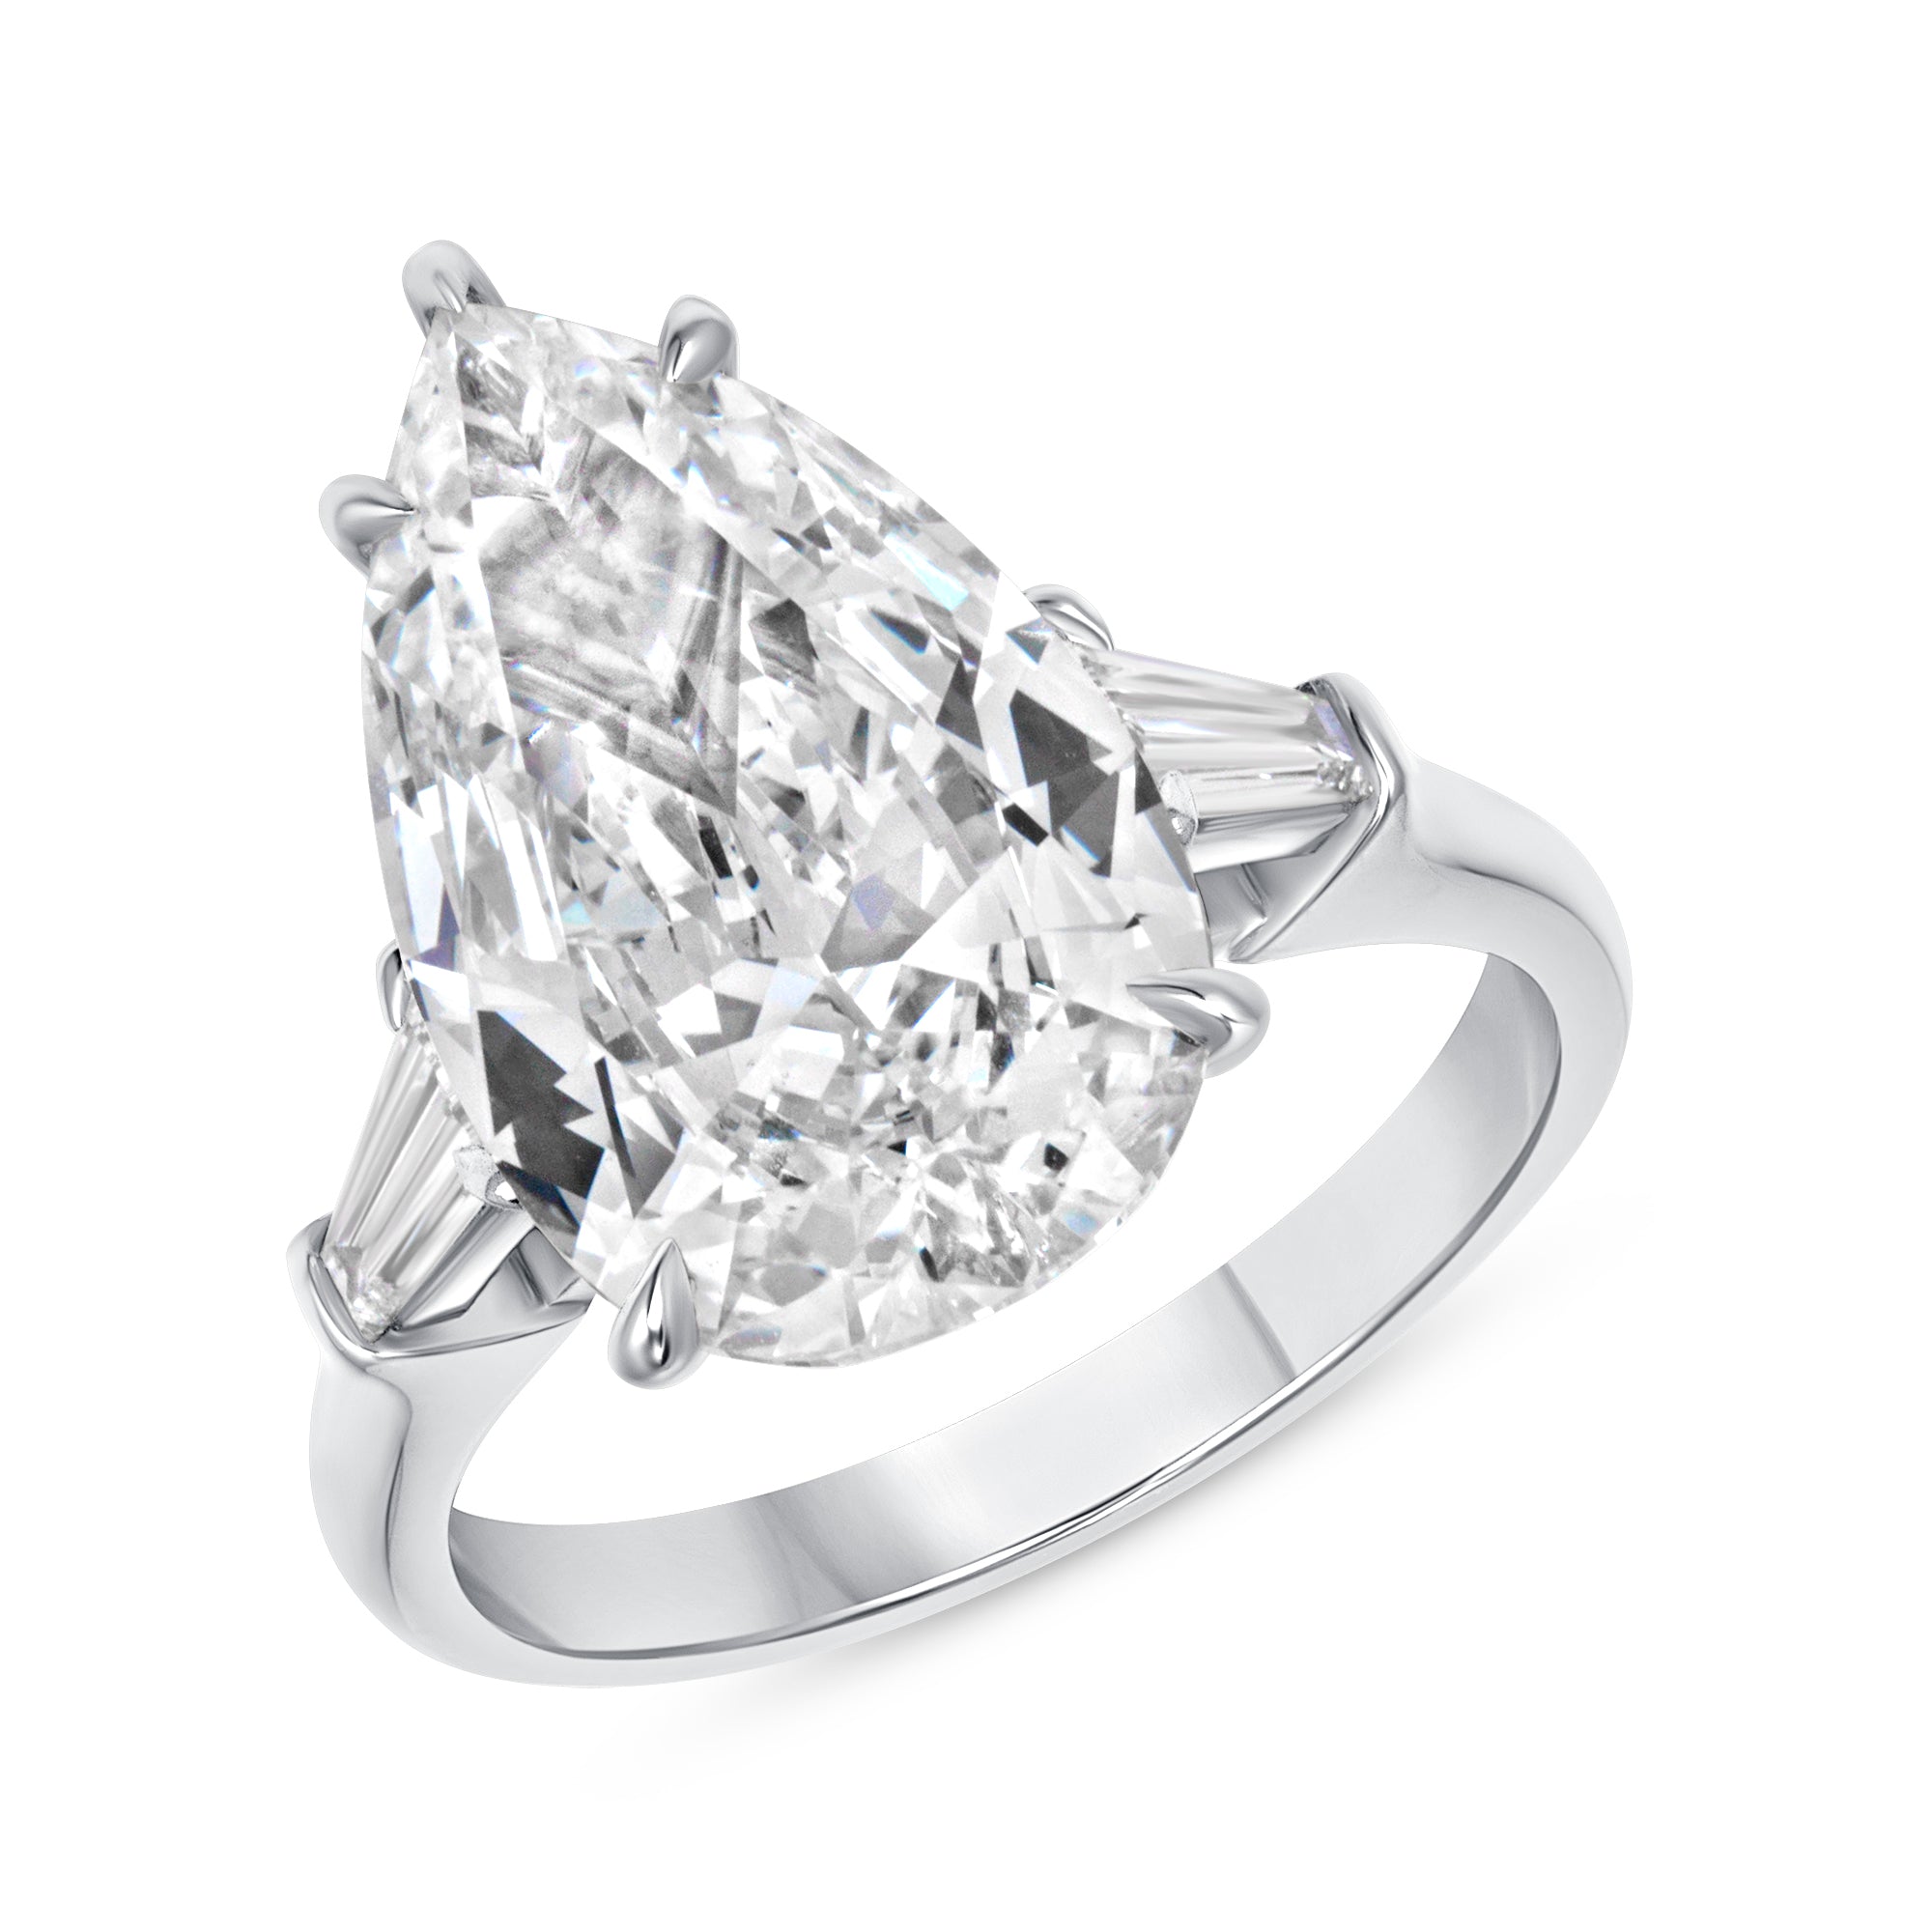 4.94ct Pear Cut Diamond with Tapered Baguette Side Stones inPlatinum Band, GIA Certified